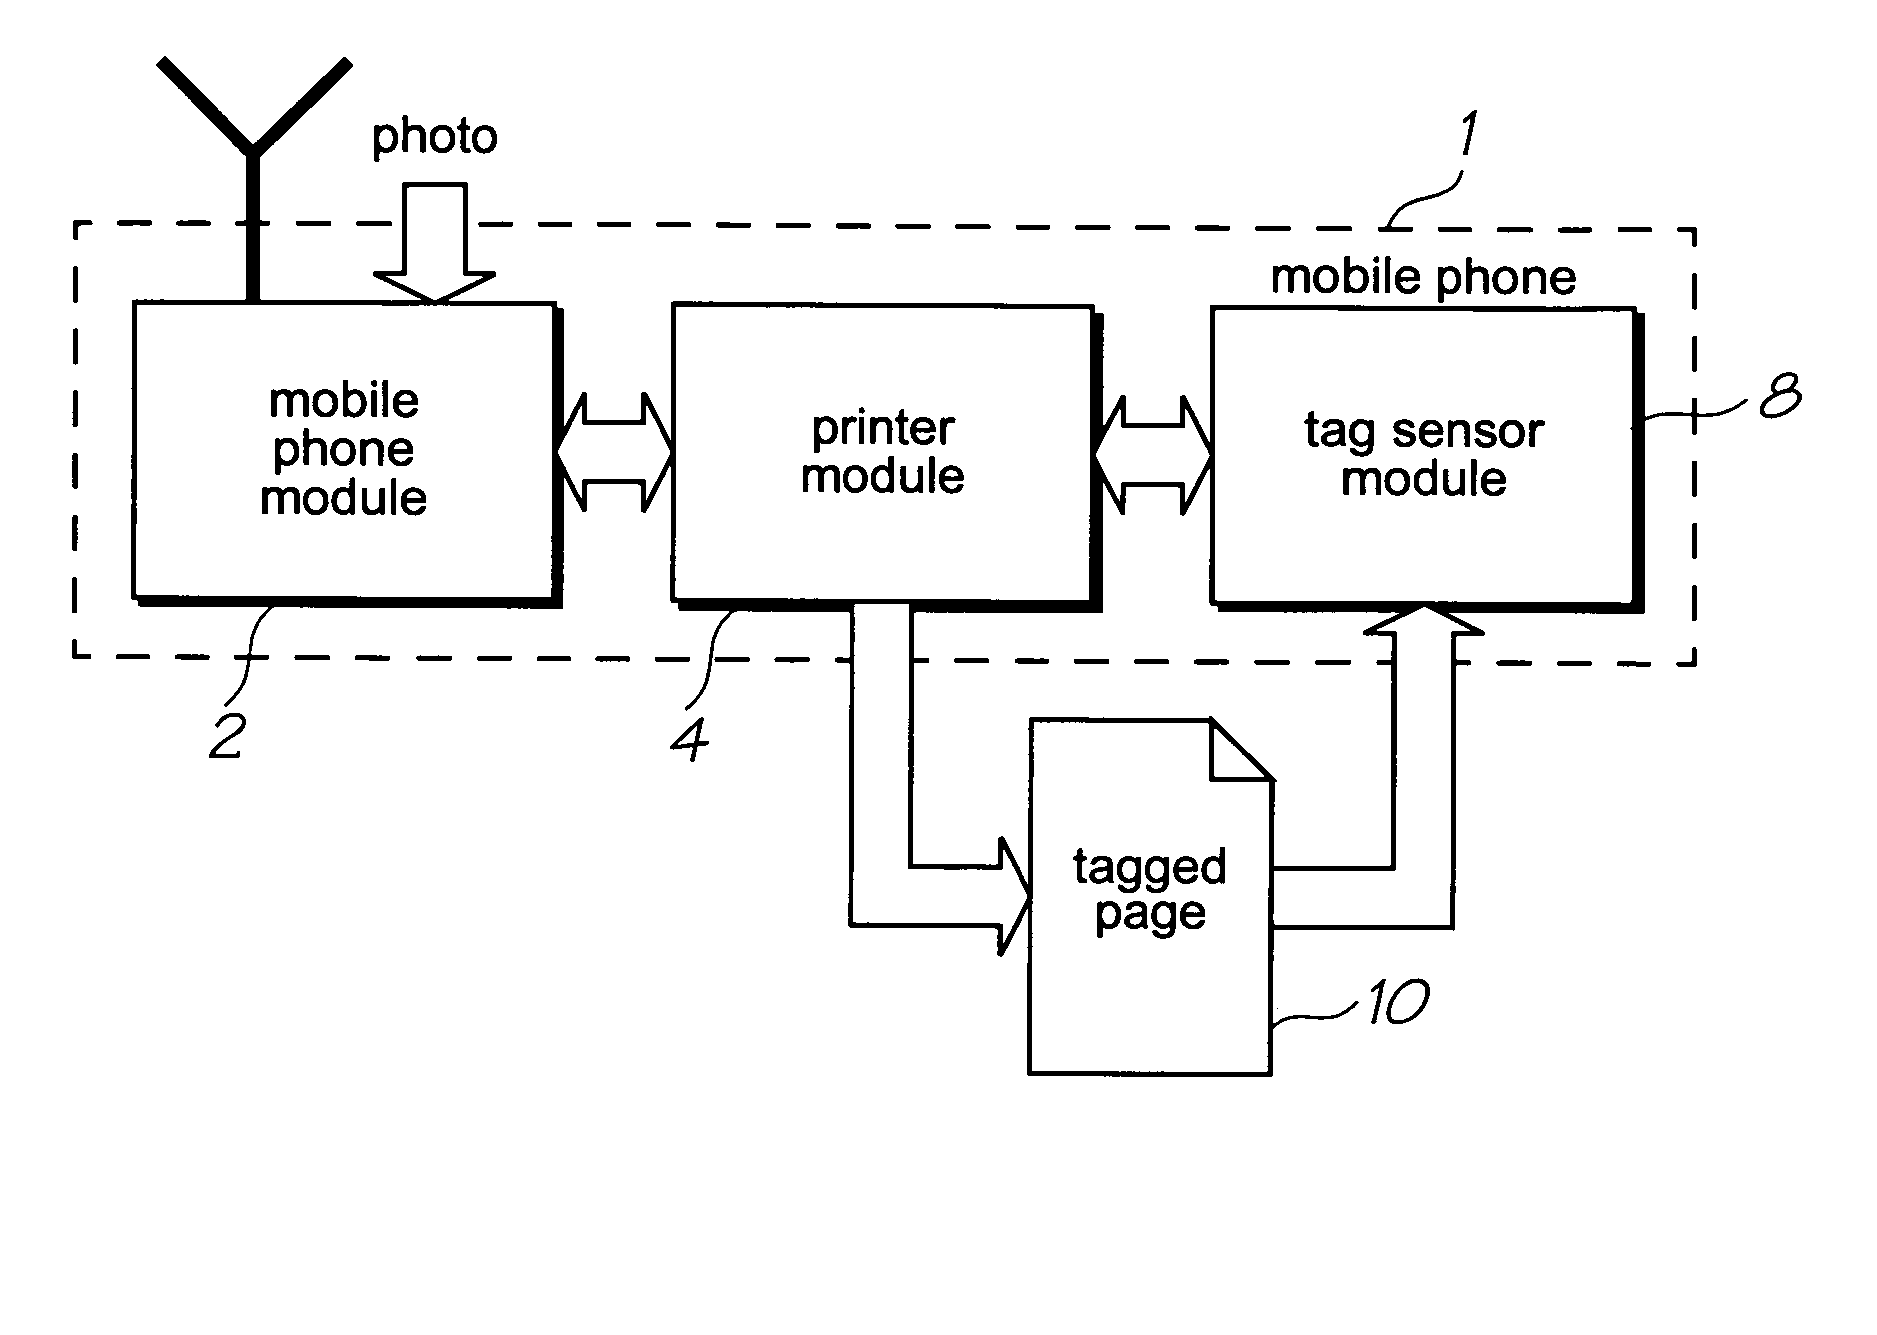 Printing video information using a mobile device